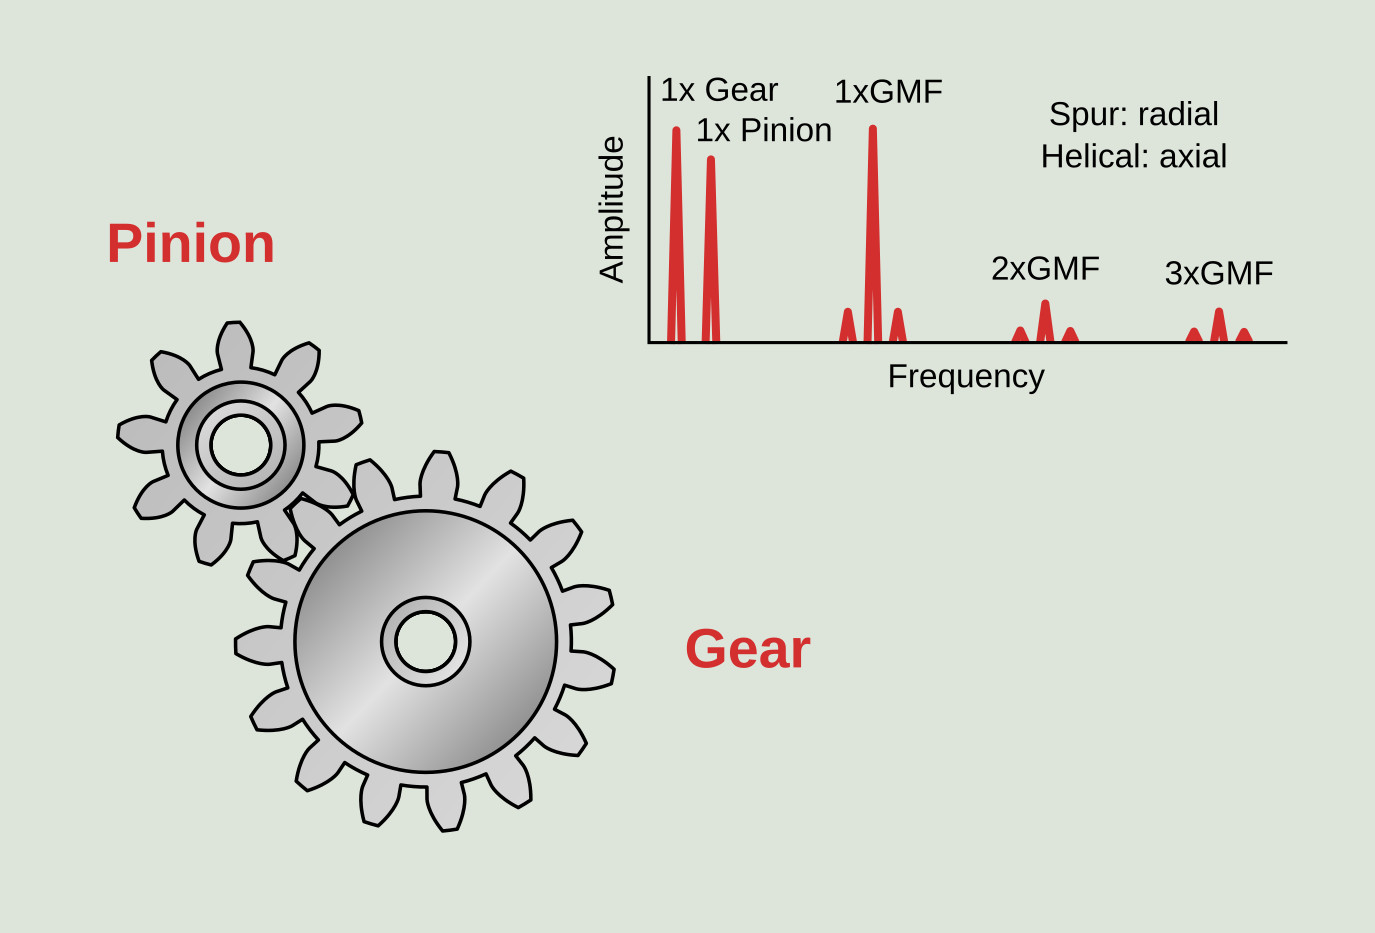 Figure 8.1: Characteristic spectrum of a gear assembly in good condition